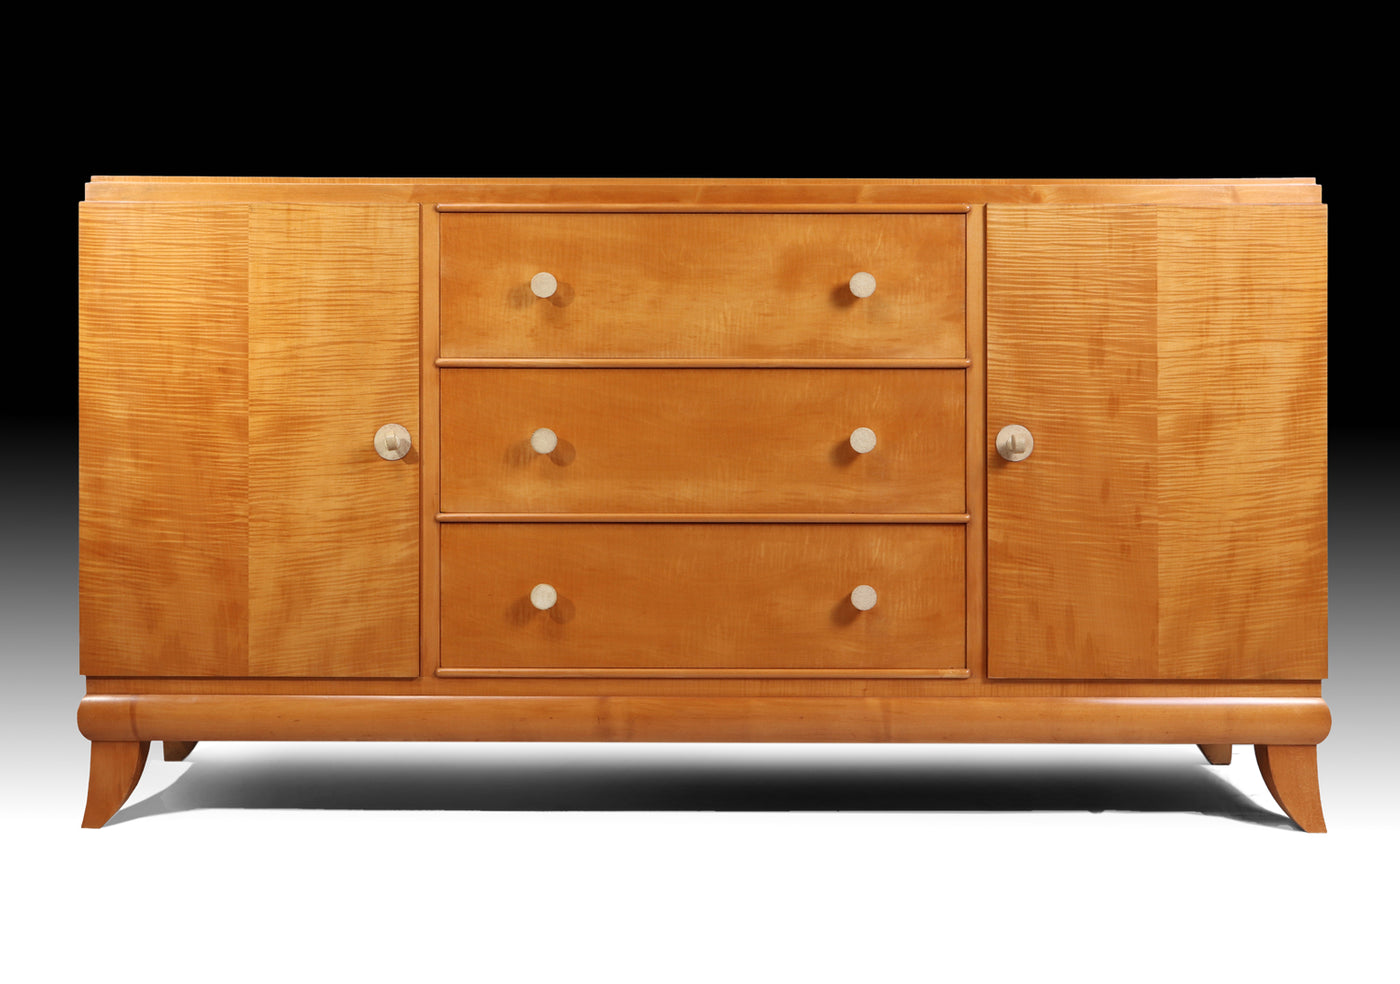 Fine French Art Deco Sideboard in Sycamore and Shagreen c1925